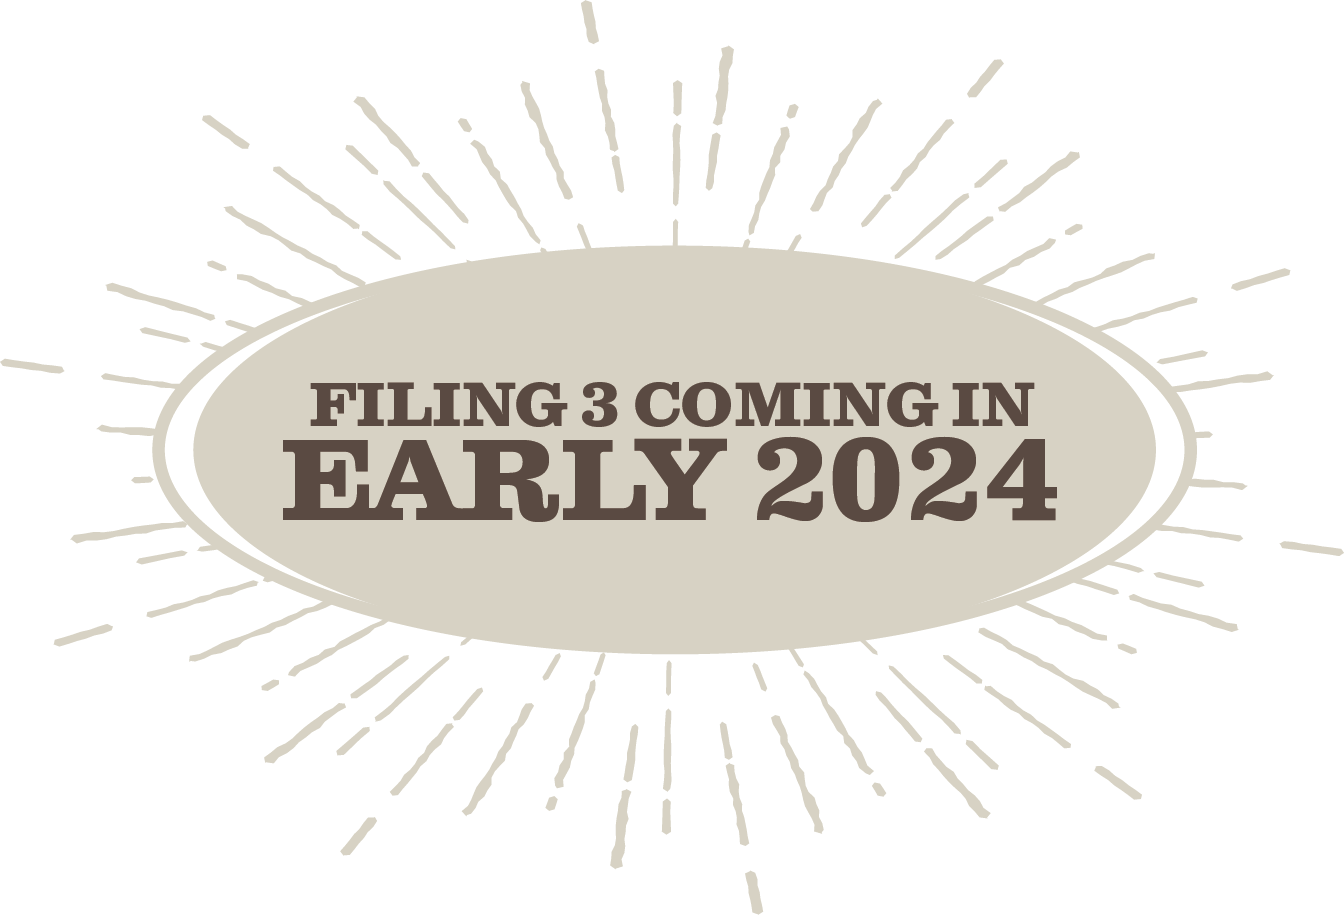 Banner saying Filing 3 coming soon in early 2024